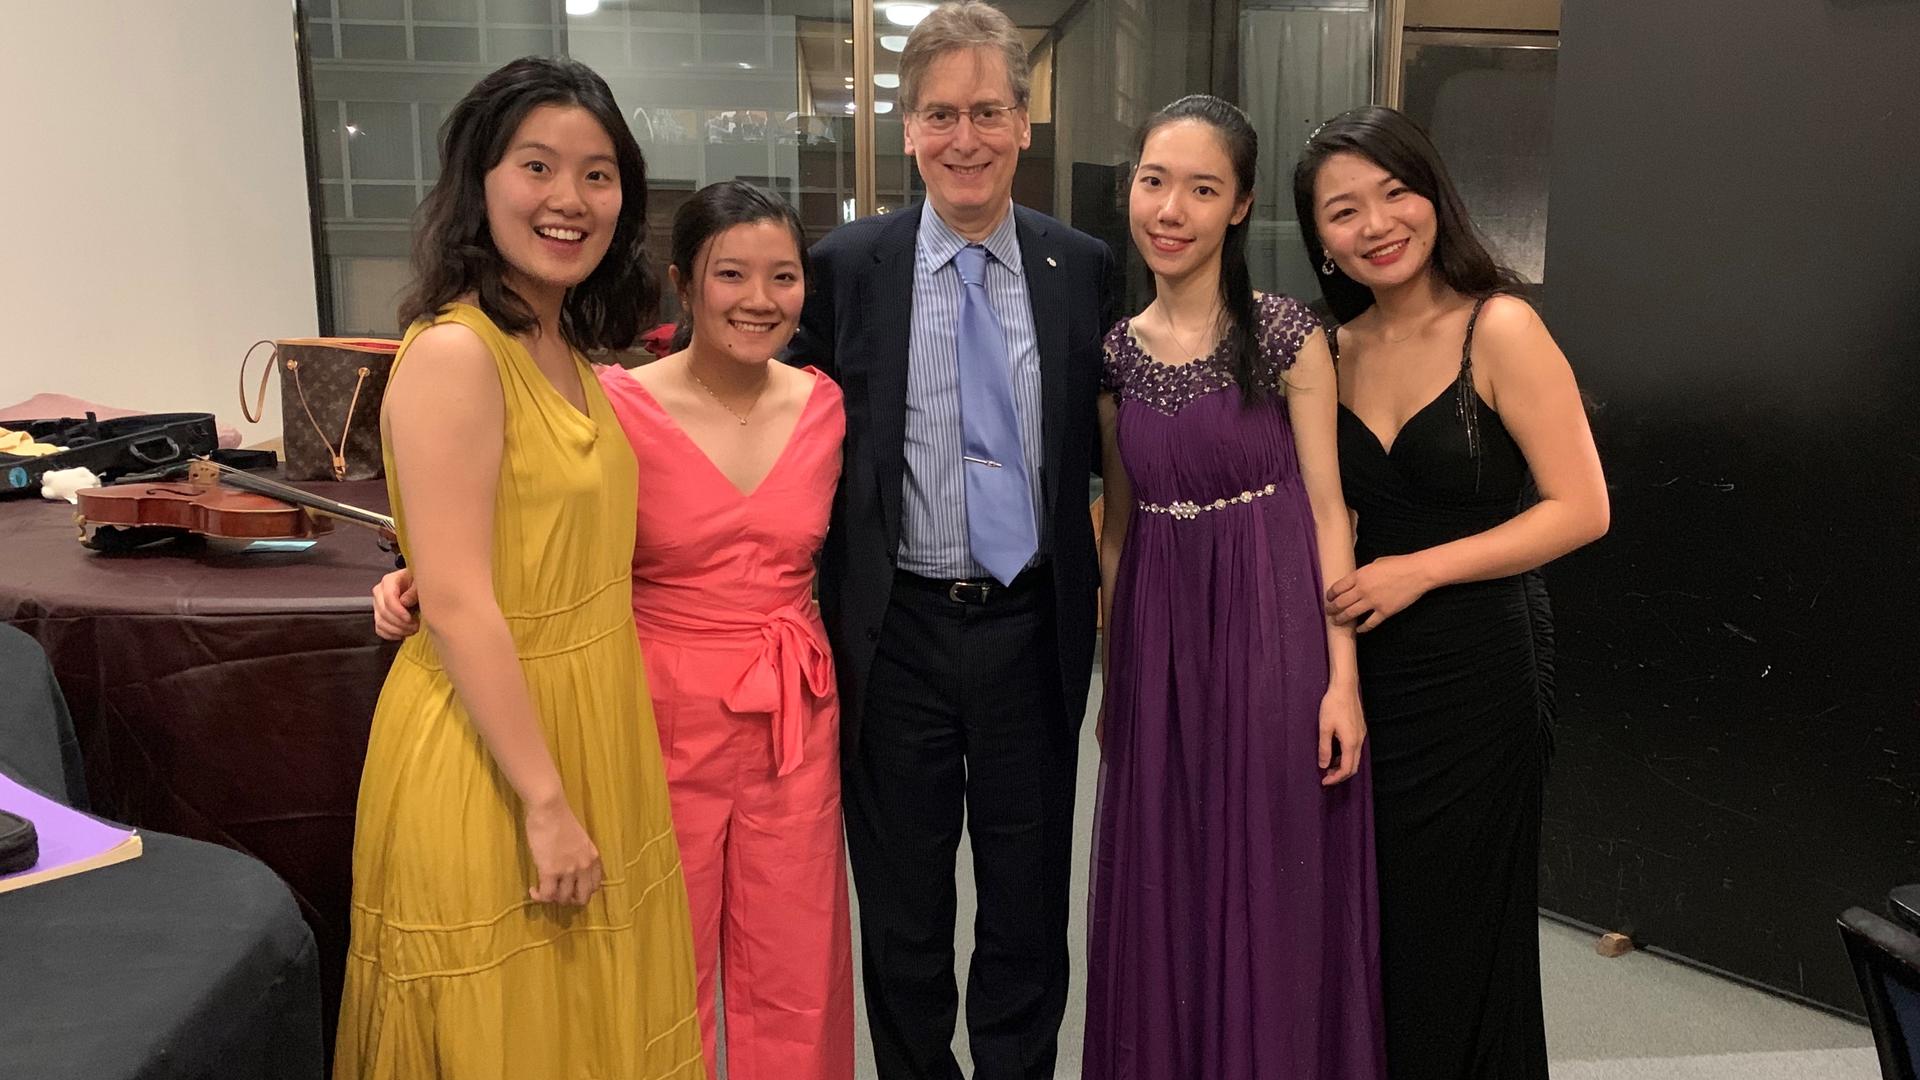 Chenchun among other Juilliard students after a show.